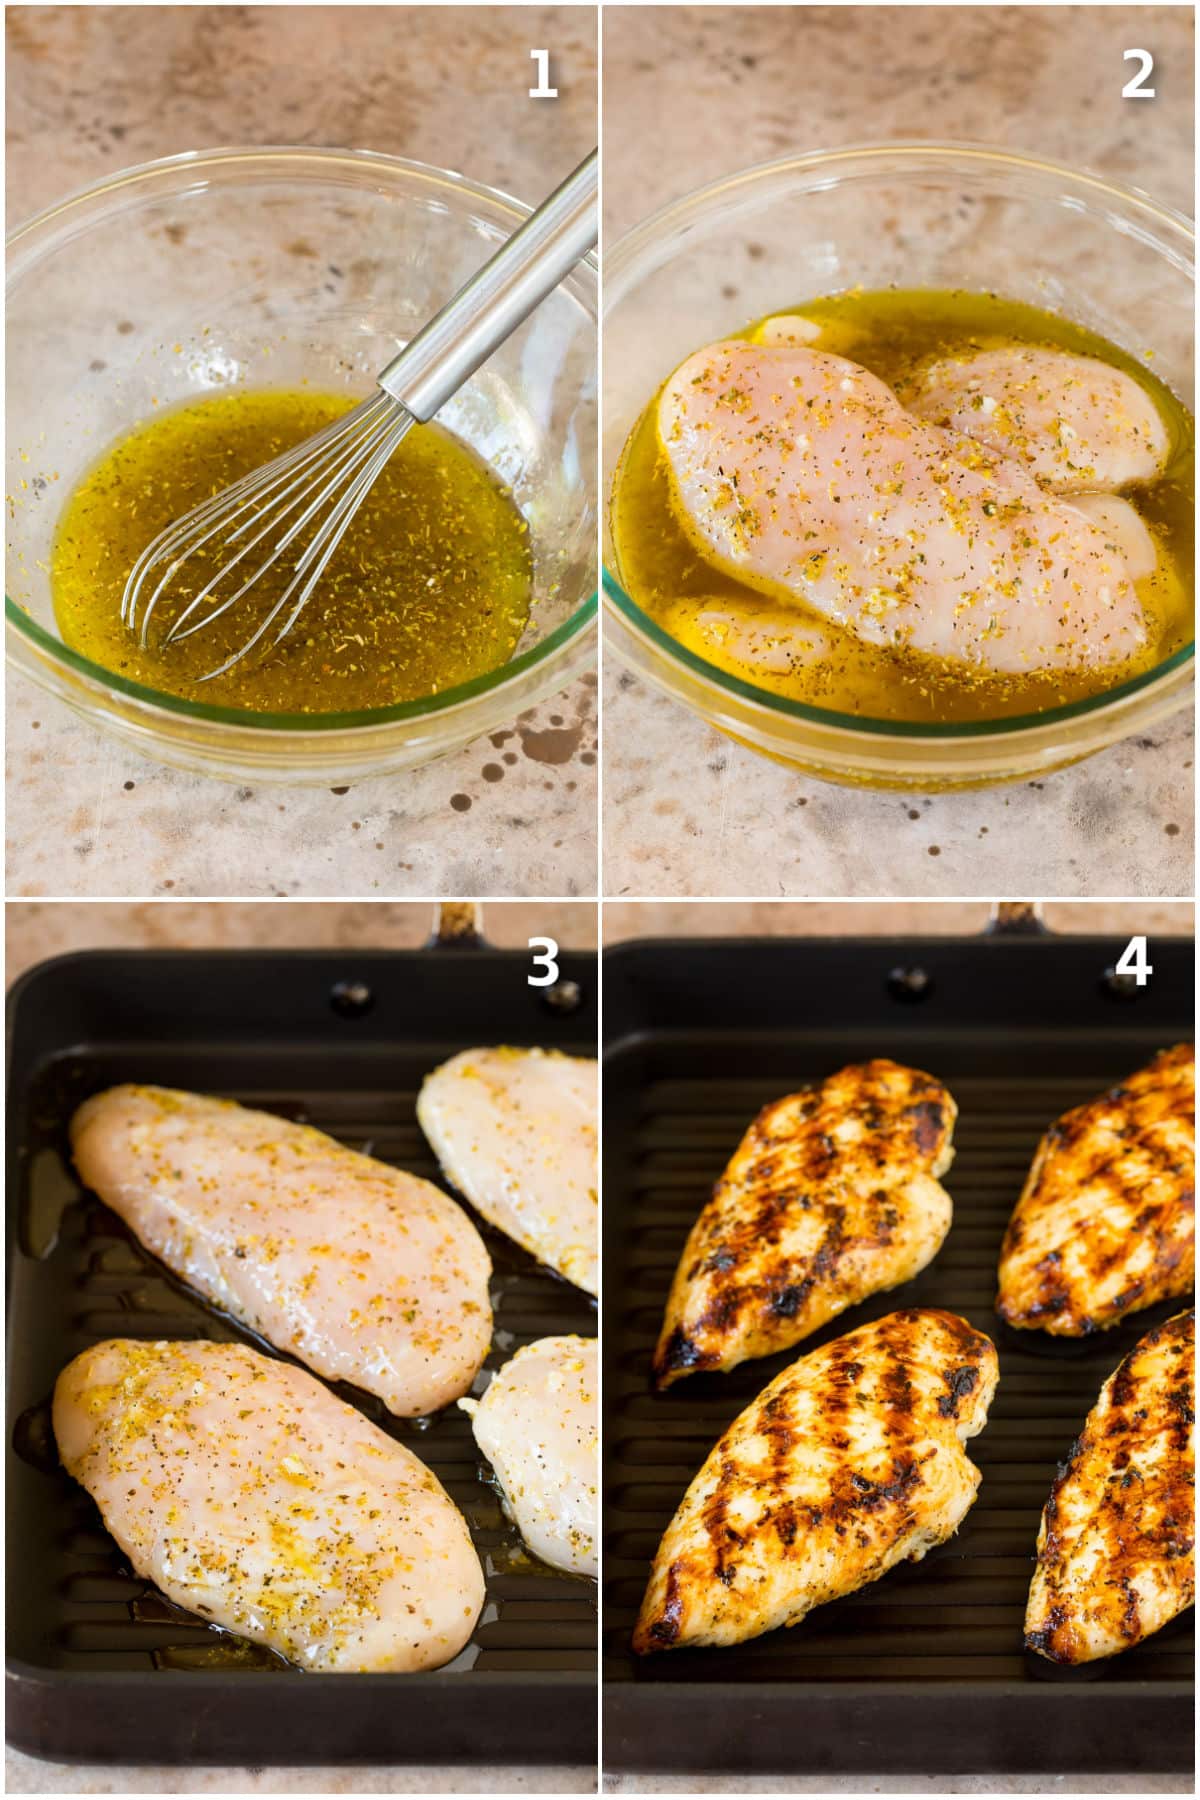 Step by step shots showing how to marinate and grill chicken.